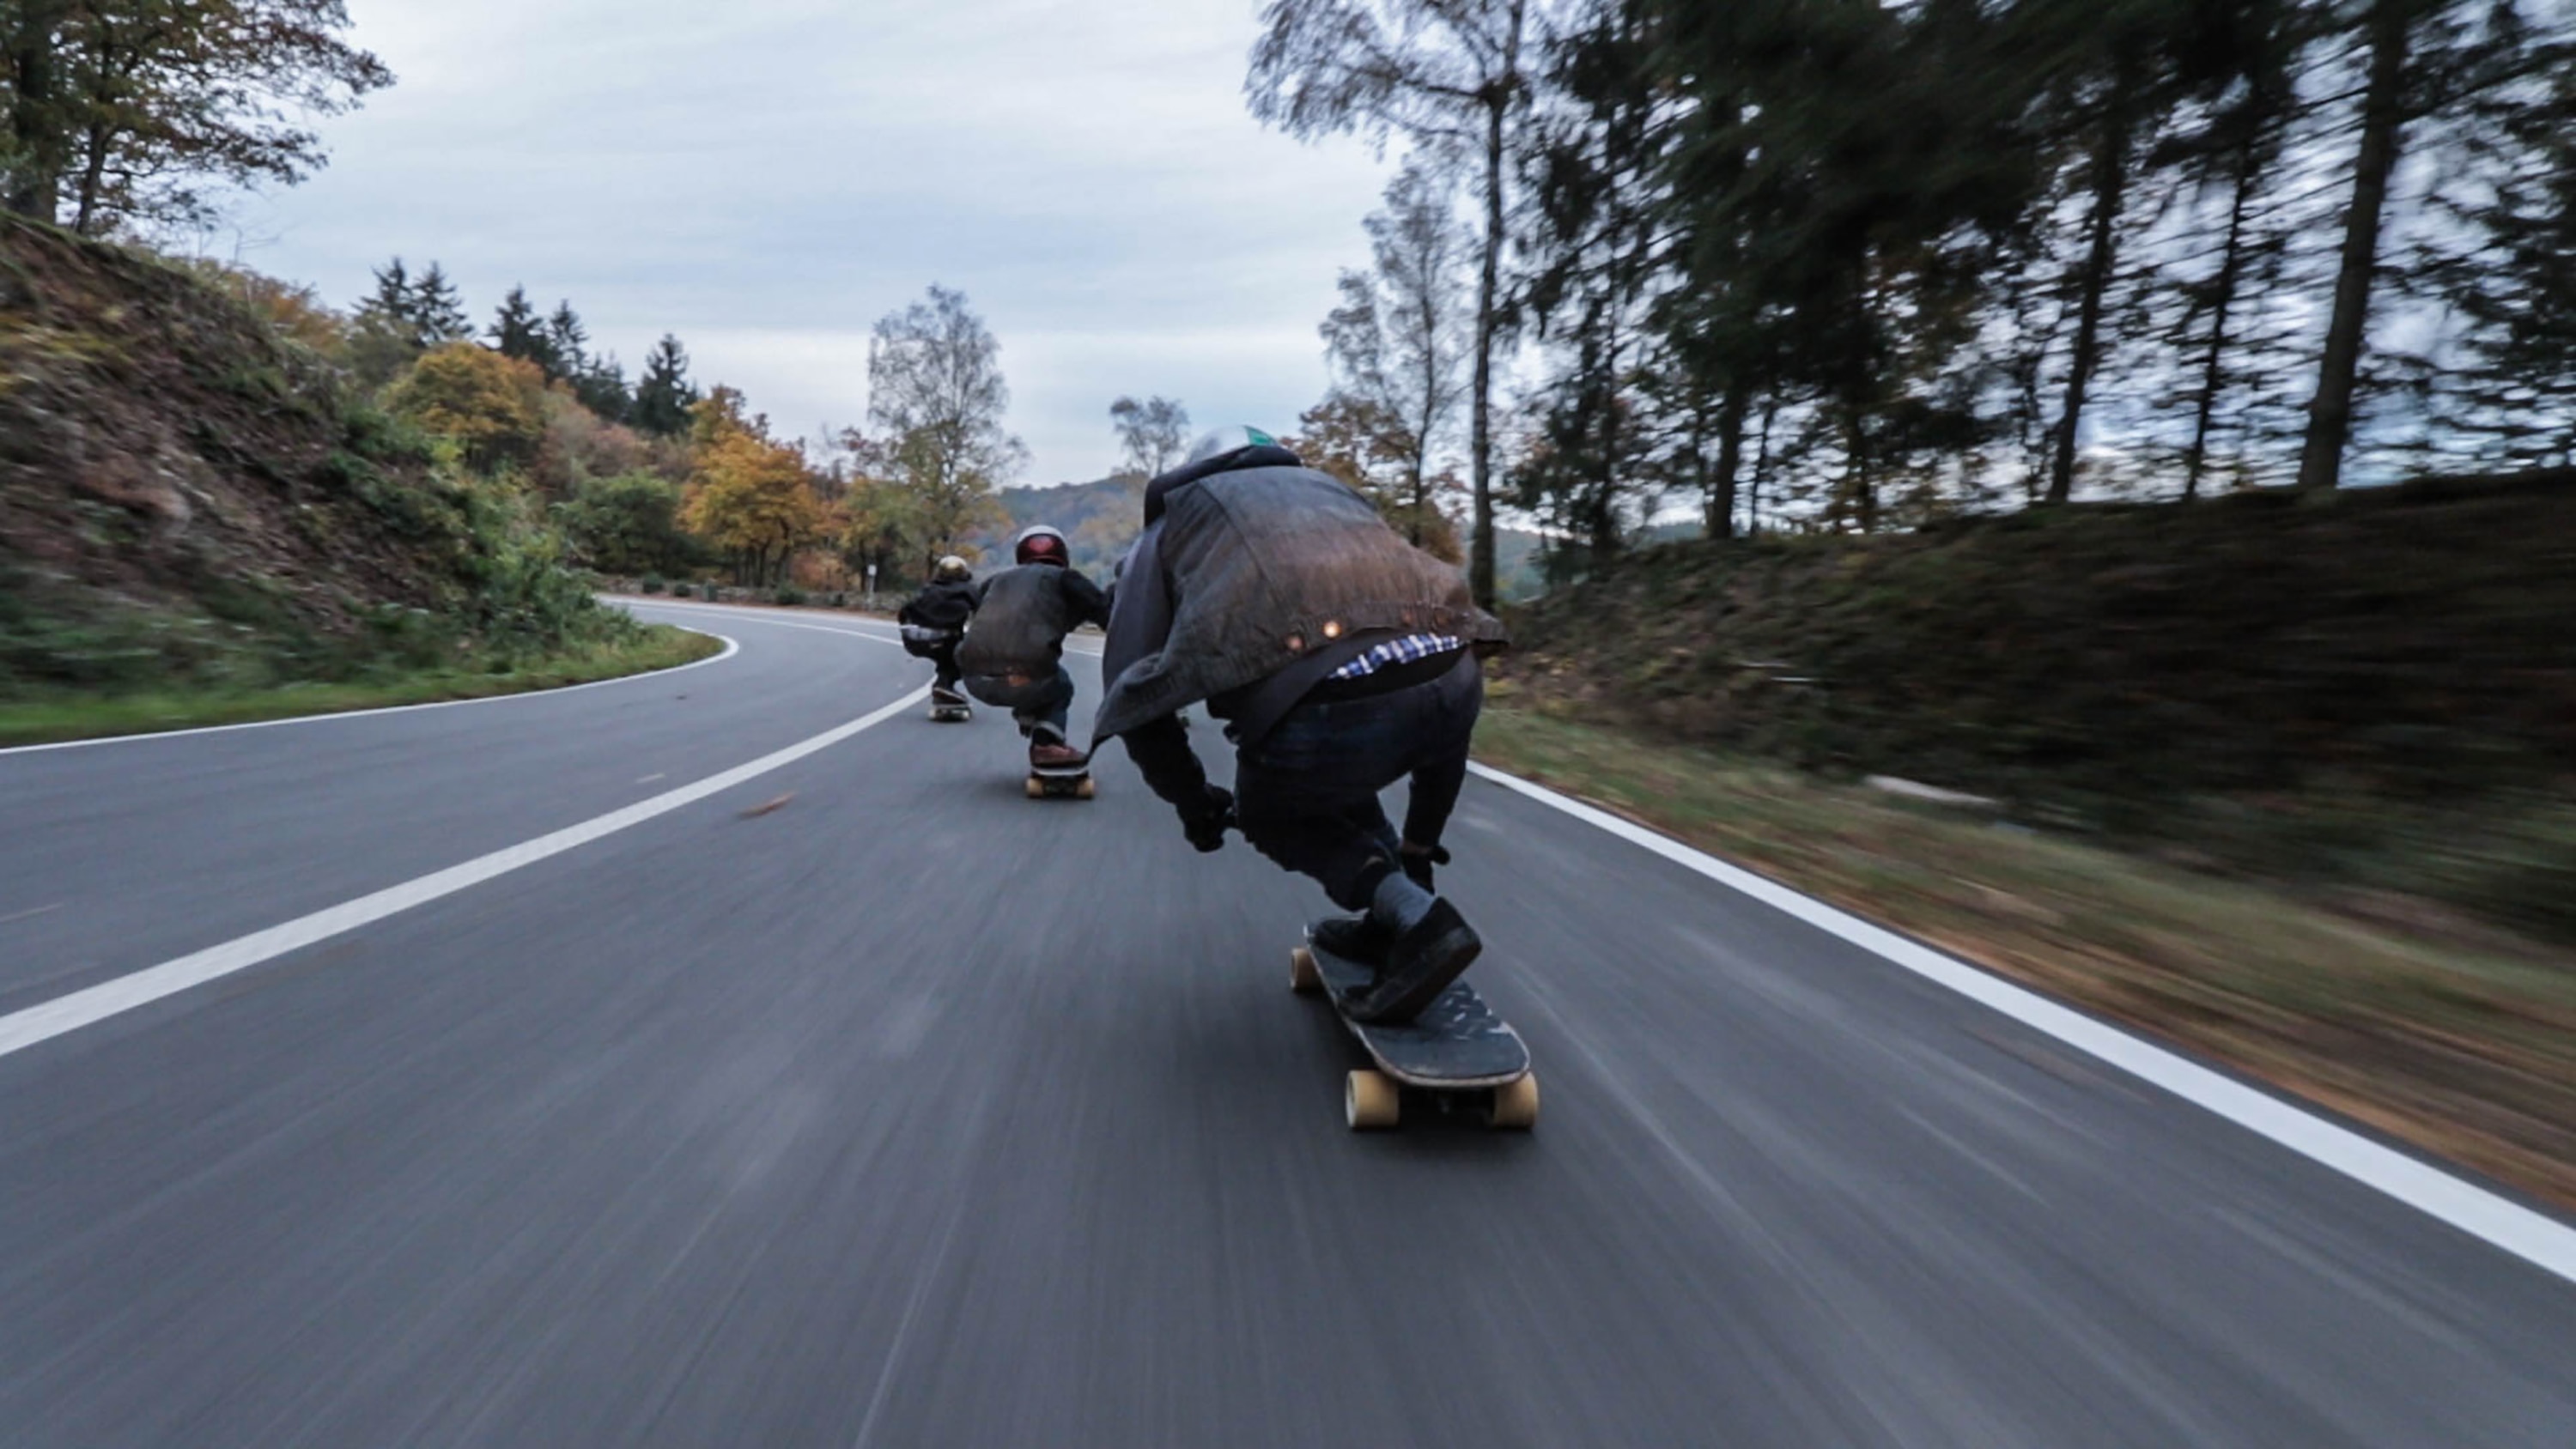 time lapse photography of 3 person doing downhill on using longboard at daytime